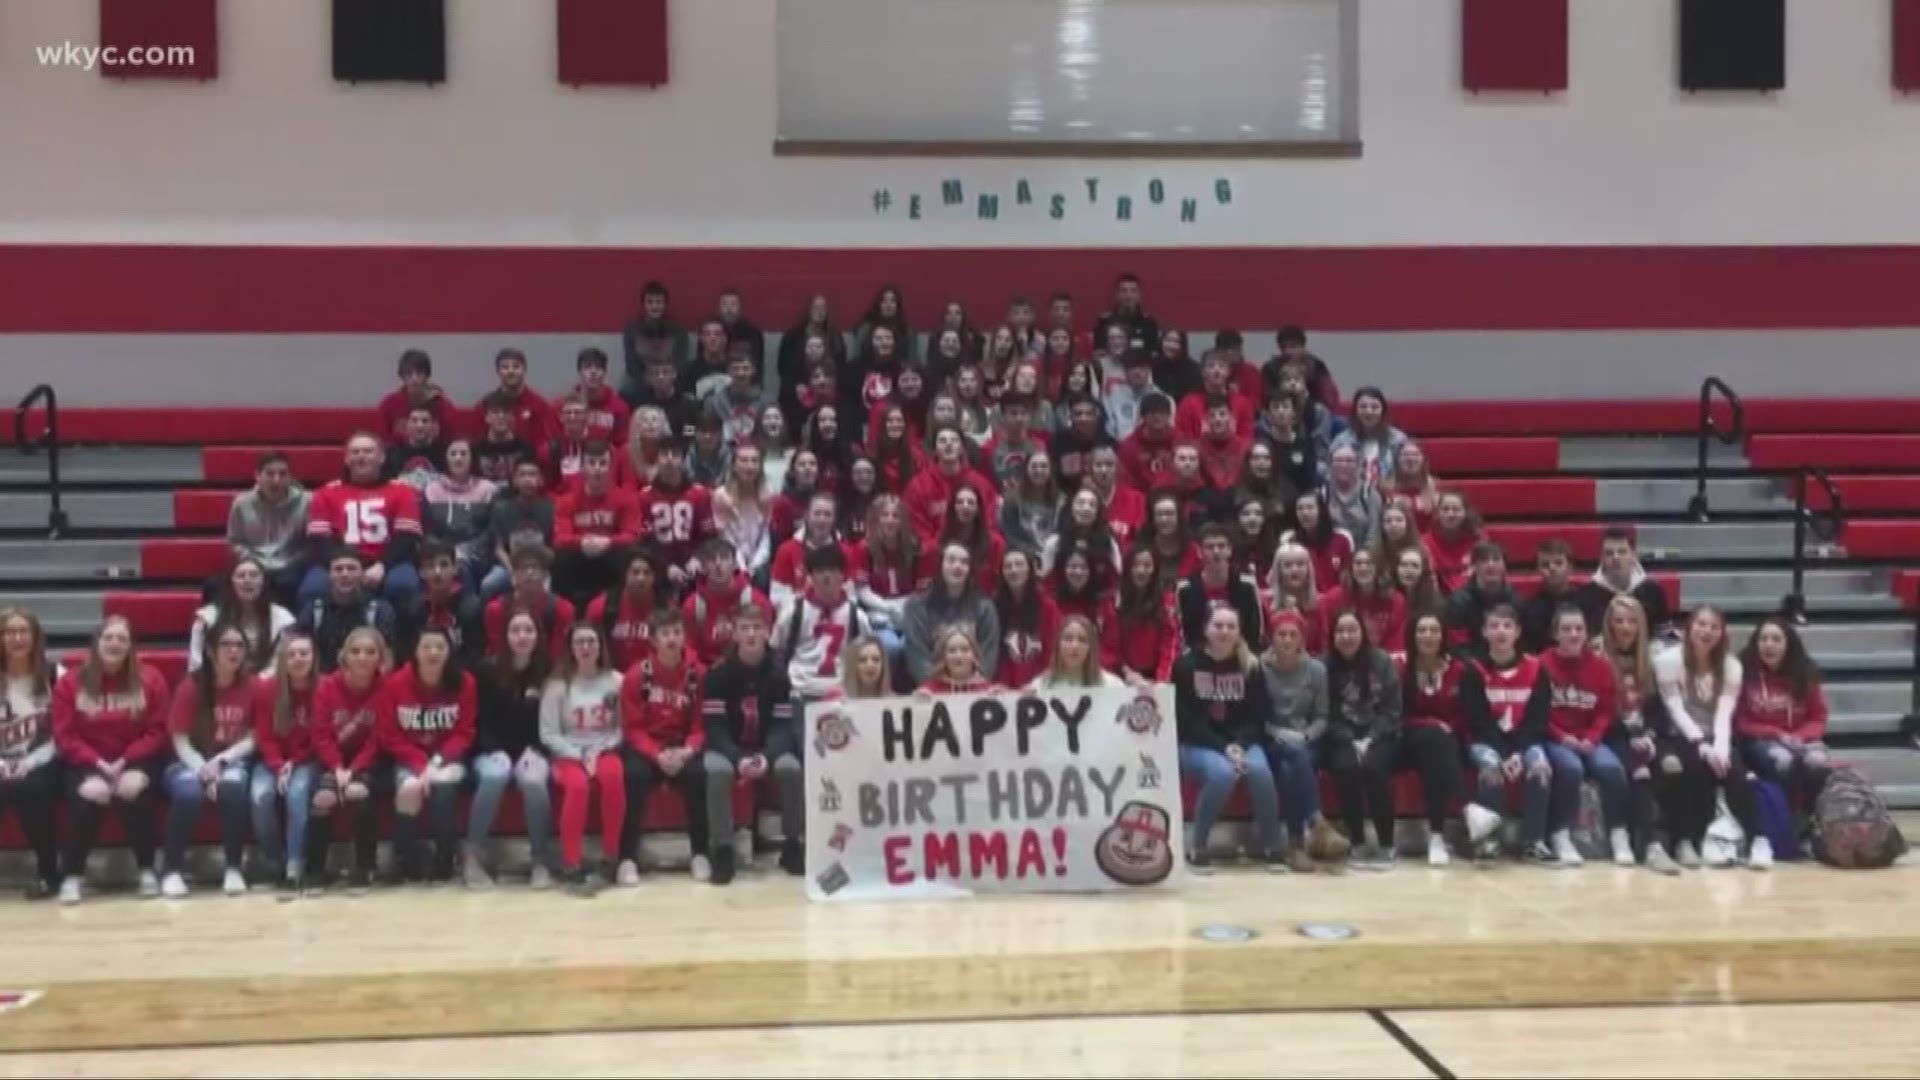 Emma Pfouts turns 17 years old today. Her classmates at Norton High School wanted to make sure it was a special day.